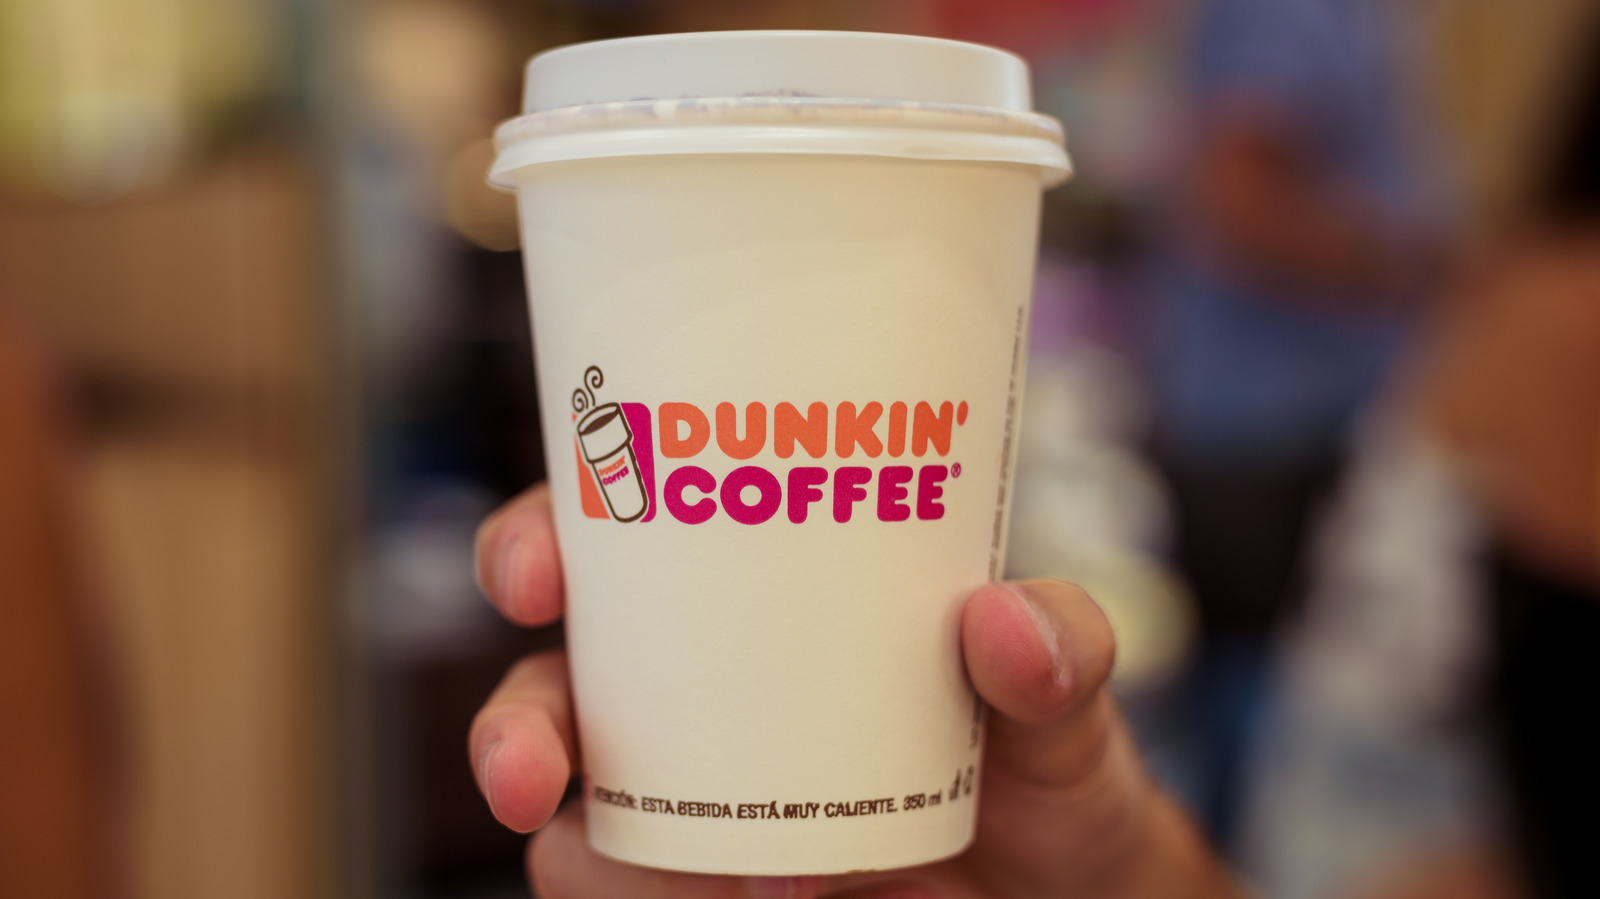 How Are Flavor Swirls And Flavor Shots Different At Dunkin'?